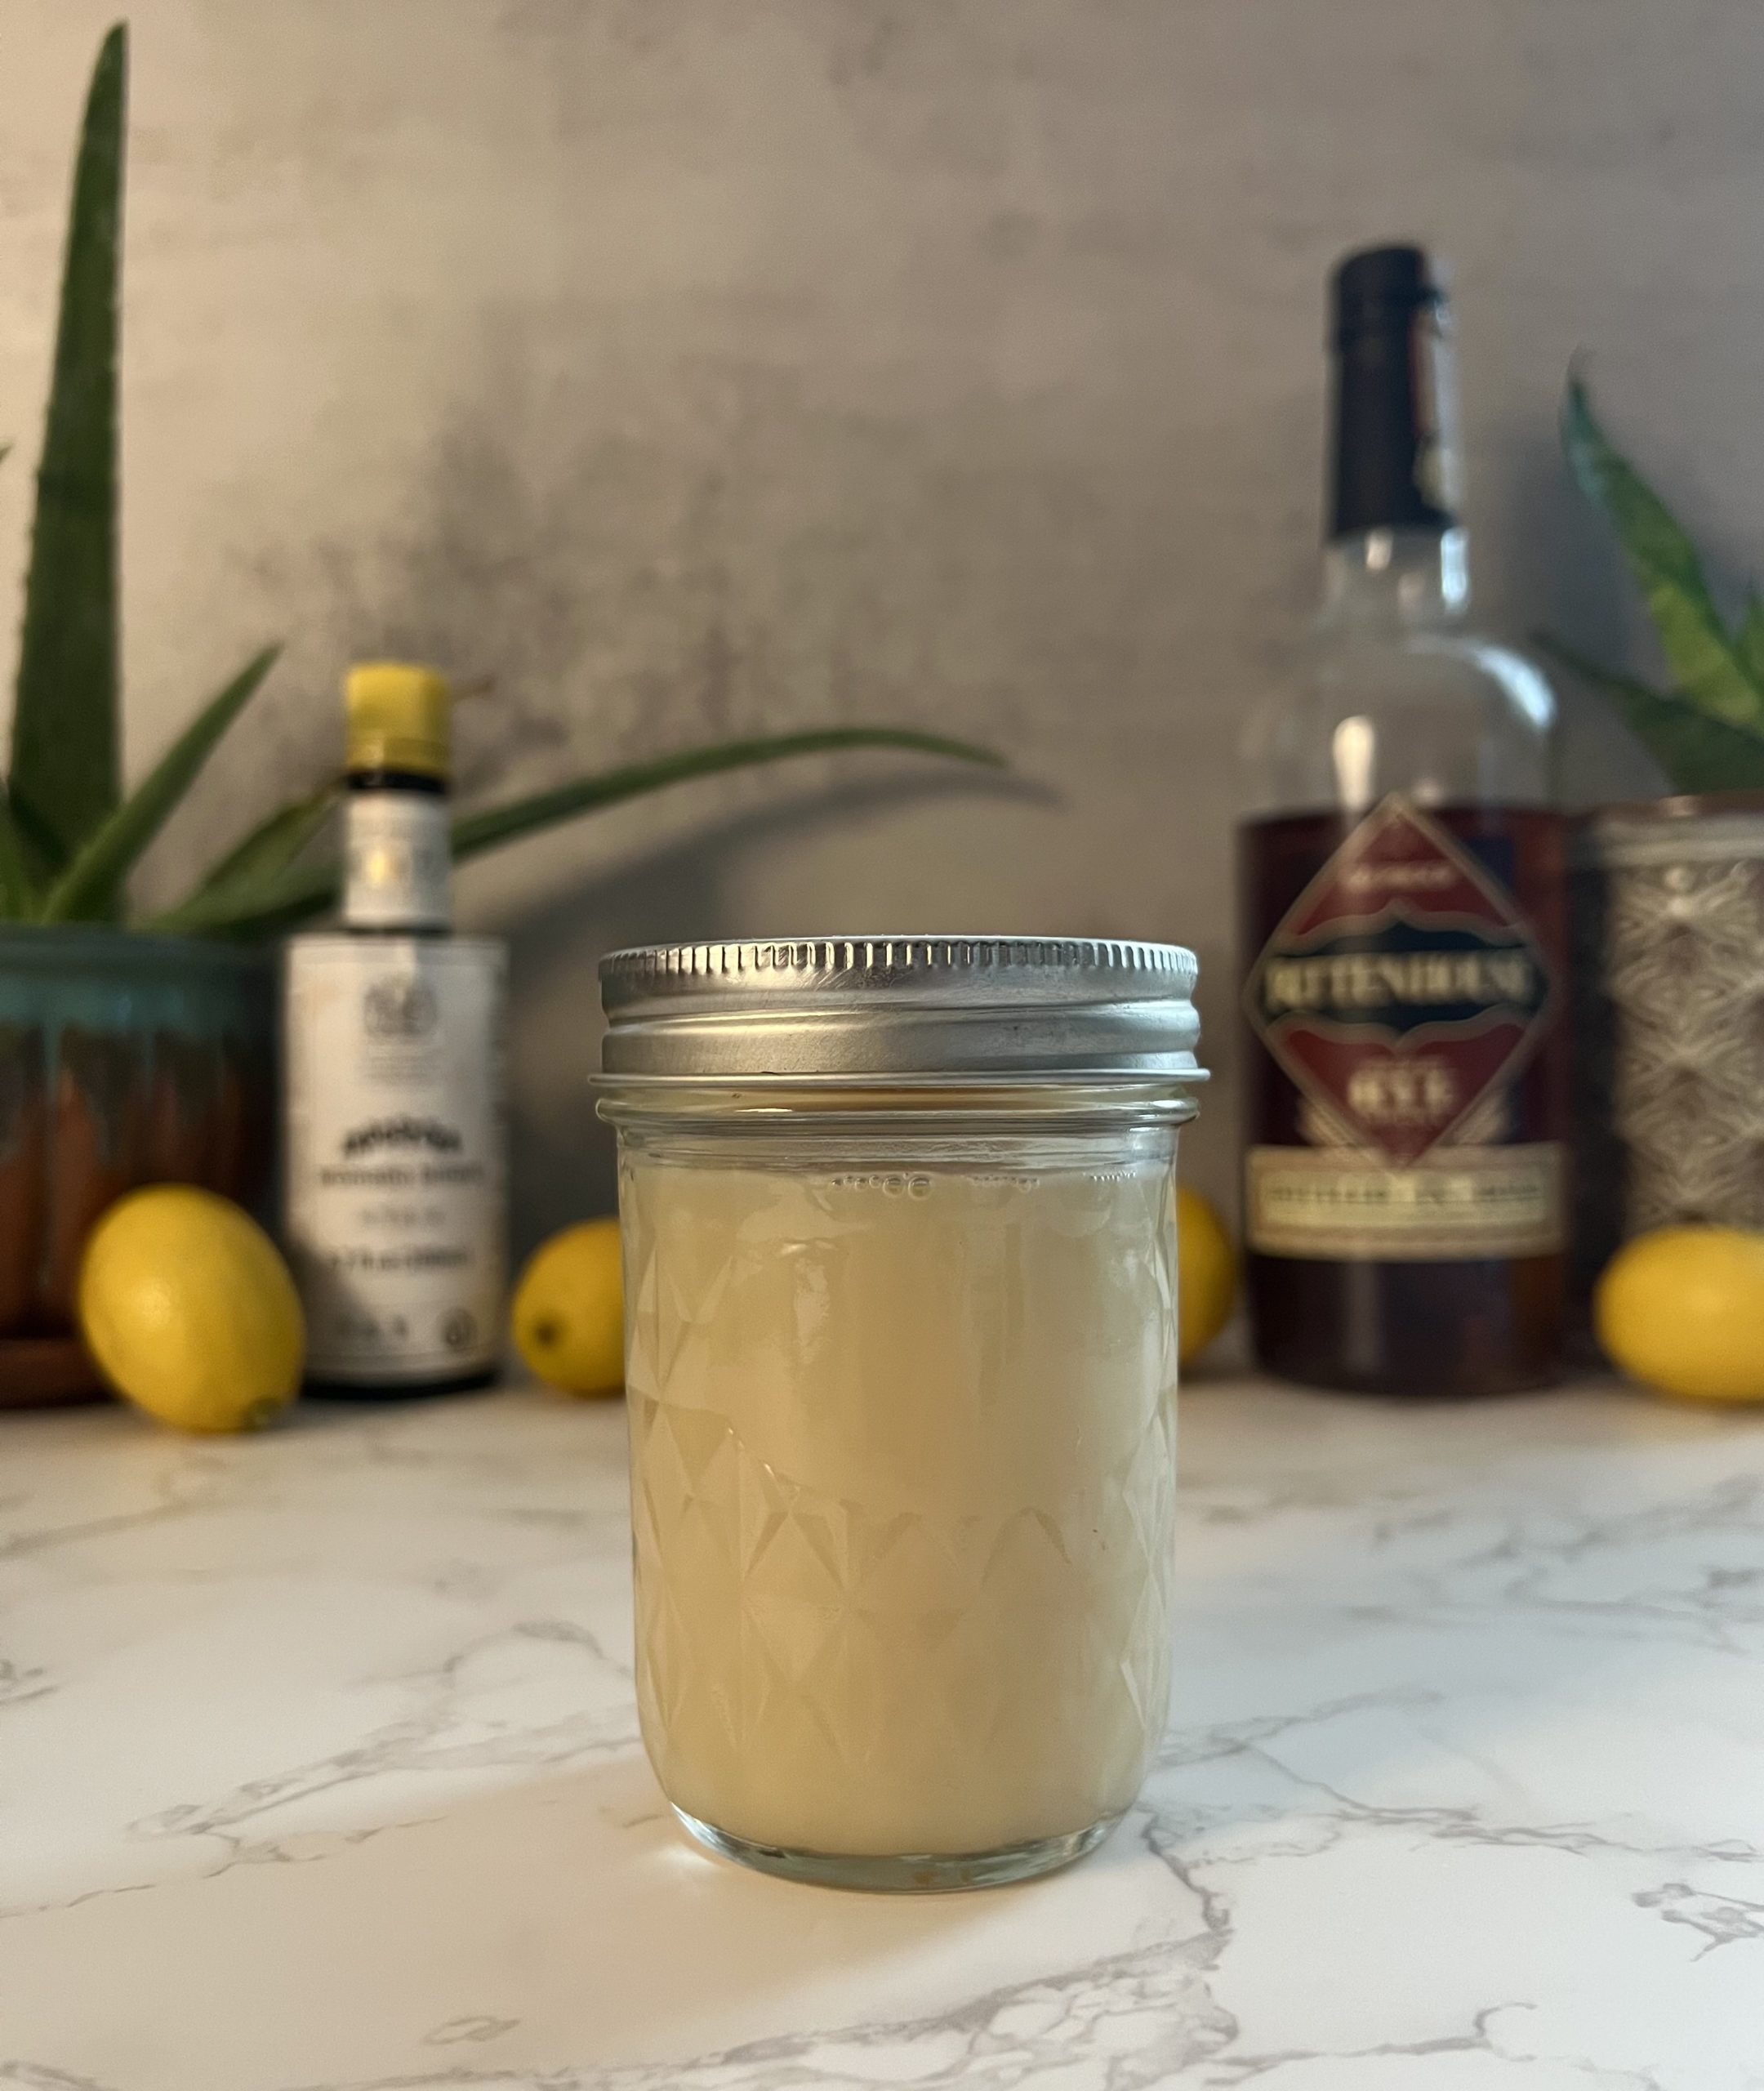 A mason jar filled with orgeat on a countertop with lemons, plants, and other ingredients blurred in the background.